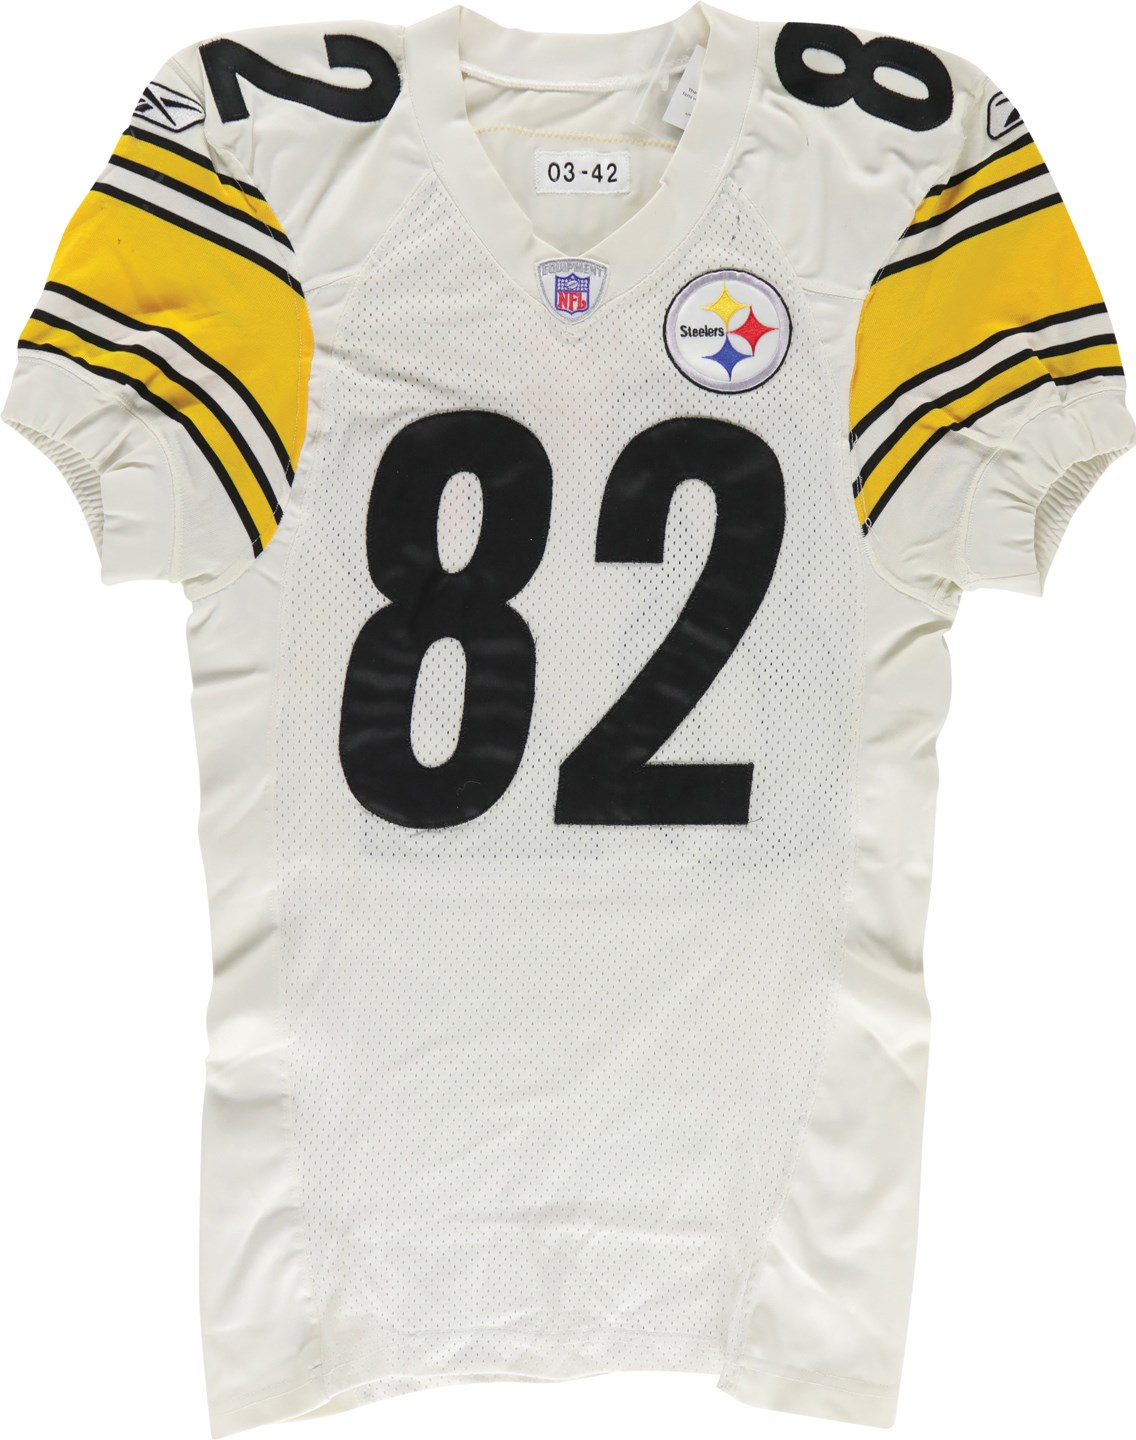 Football - 2003 Antwaan Randle El Pittsburgh Steelers Game Worn Jersey - Matched to Four Games with 3rd Career TD Catch & Career High Kick Return Yards Game (Photo-Matched & Steelers COA)